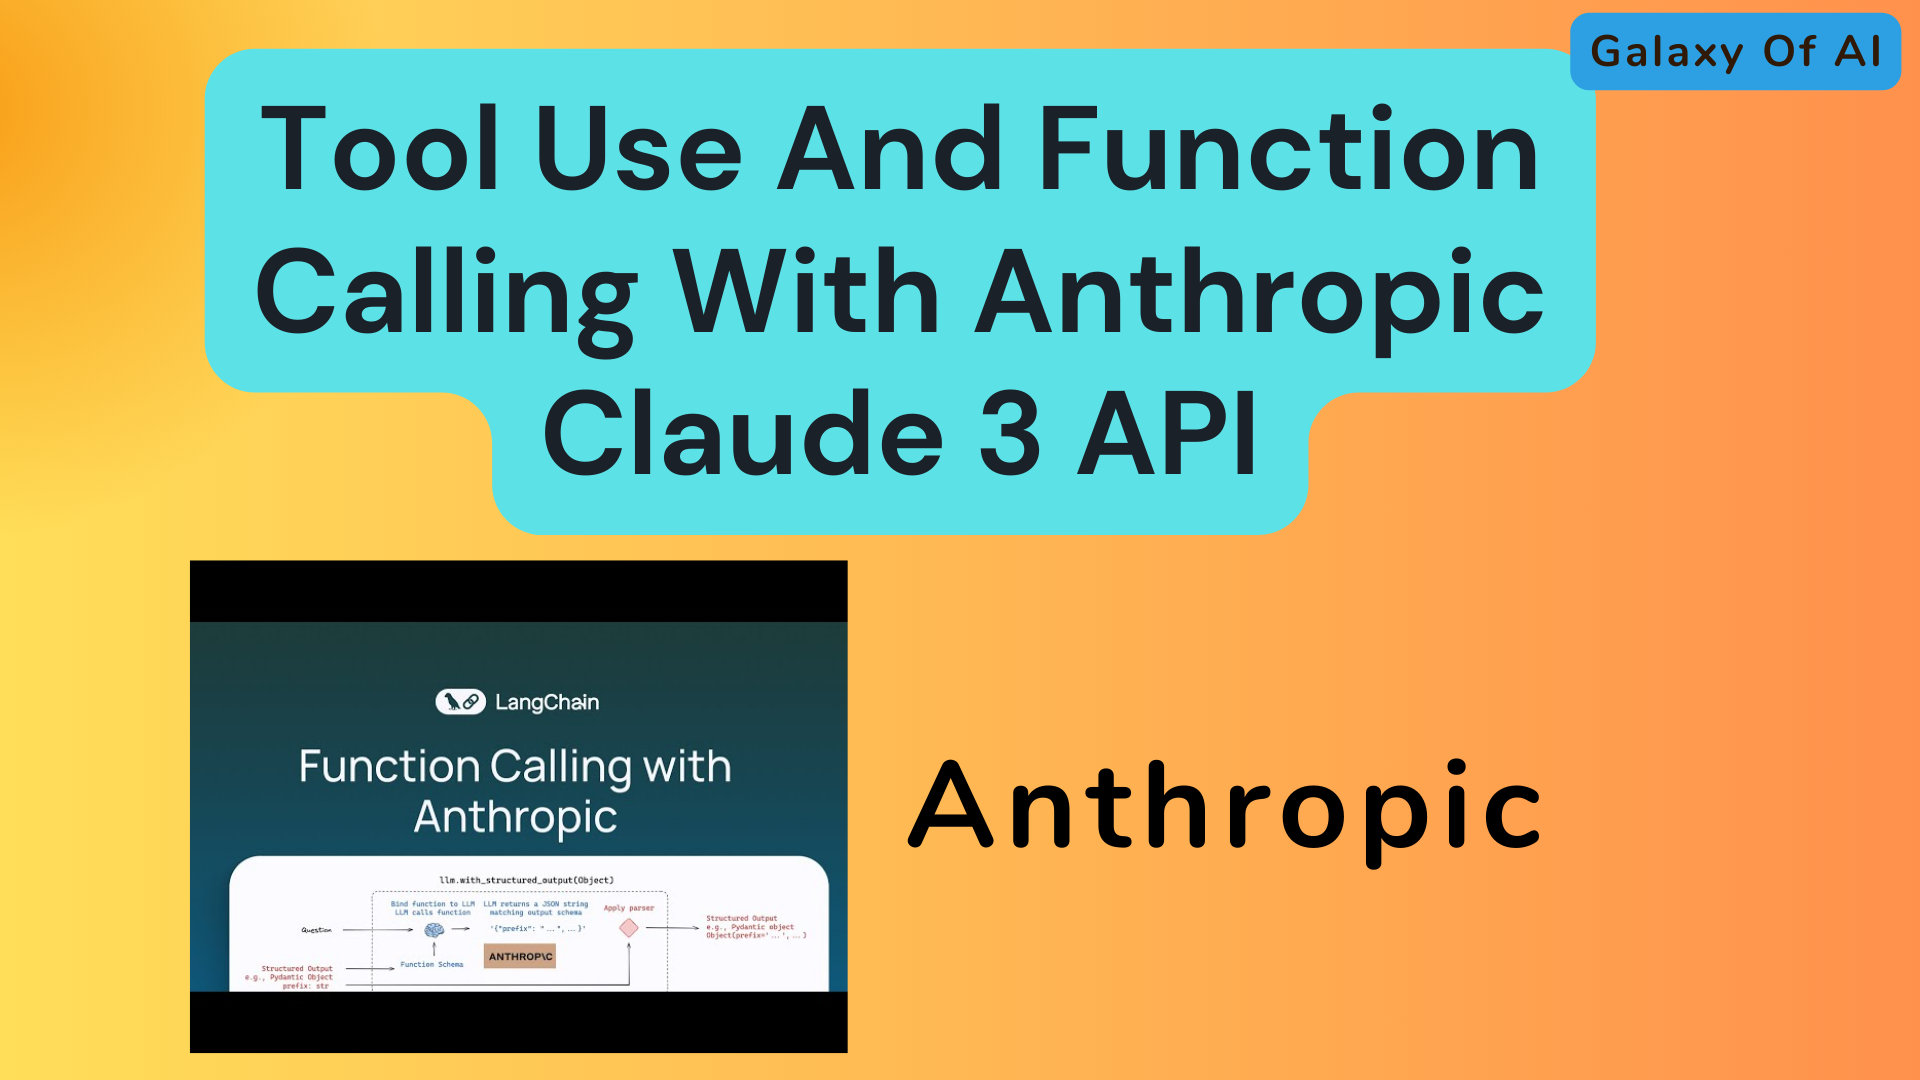 Tool Use And Function Calling With Anthropic Claude 3 API